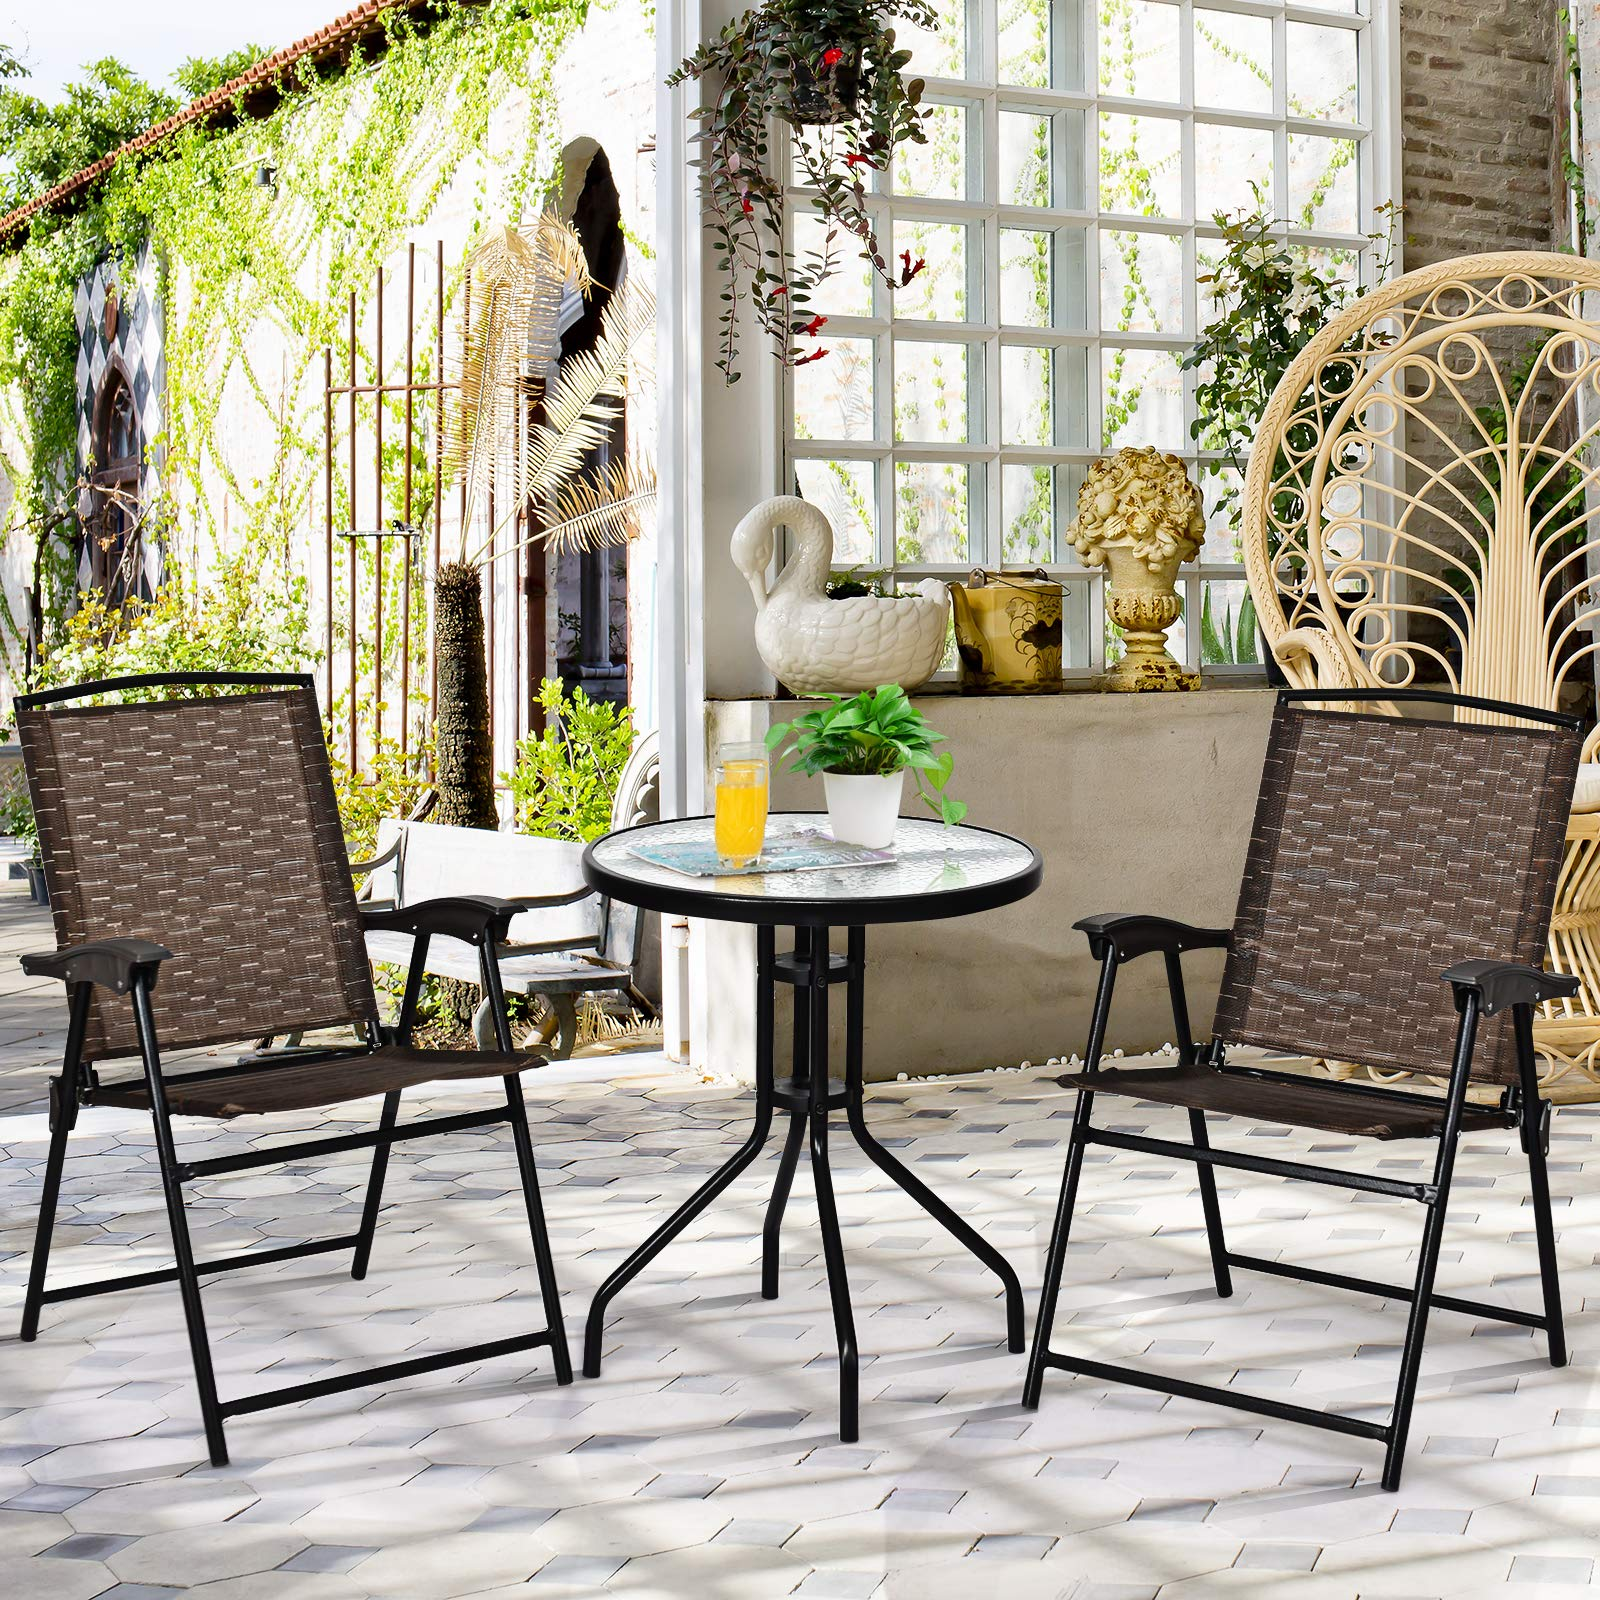 Tangkula 3 Pieces Patio Bistro Set, Outdoor Folding Chairs & Table Set